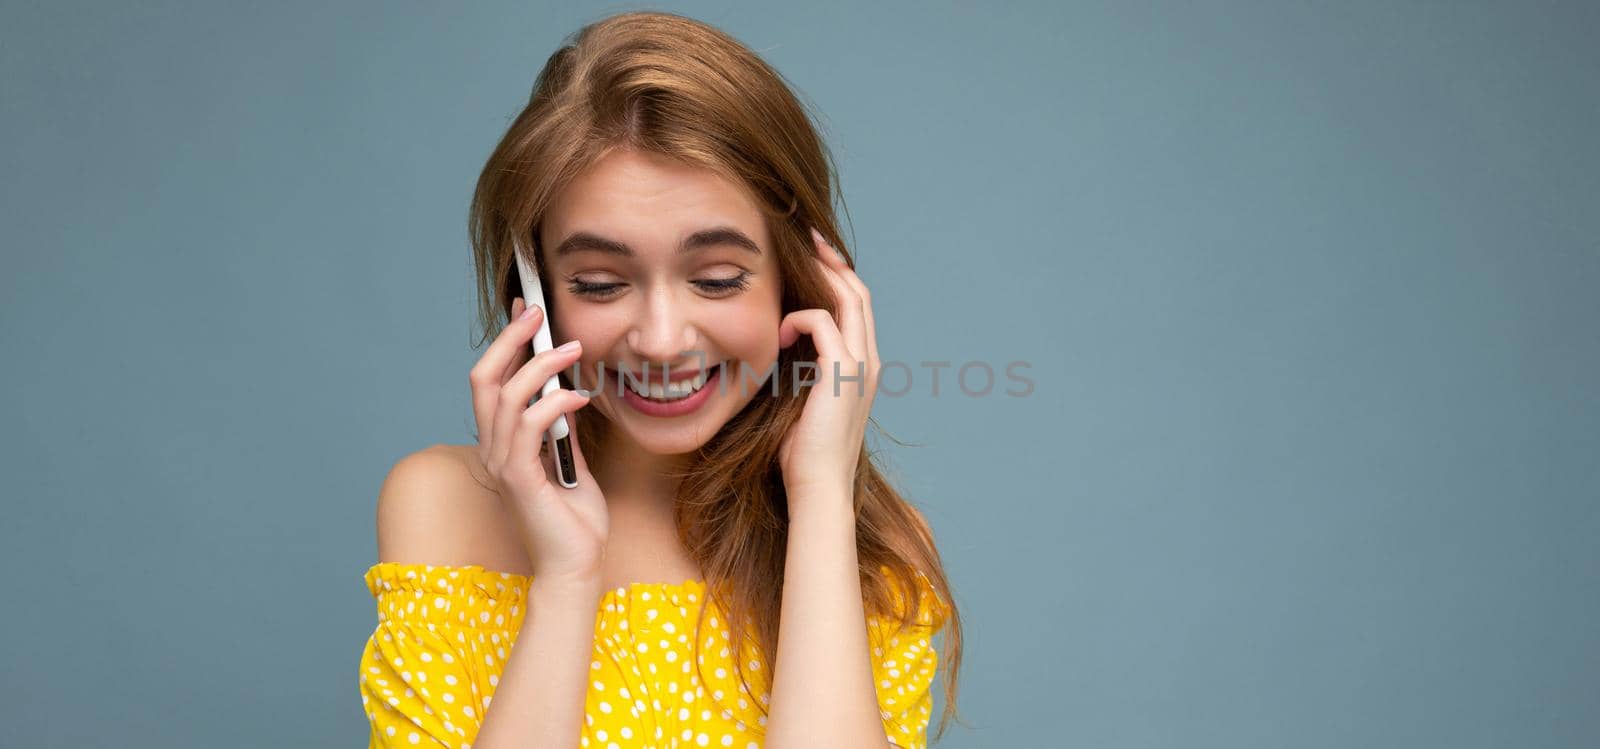 Attractive positive smiling young blonde woman wearing stylish yellow summer dress standing isolated over blue background holding and talking on mobile phone looking to down.